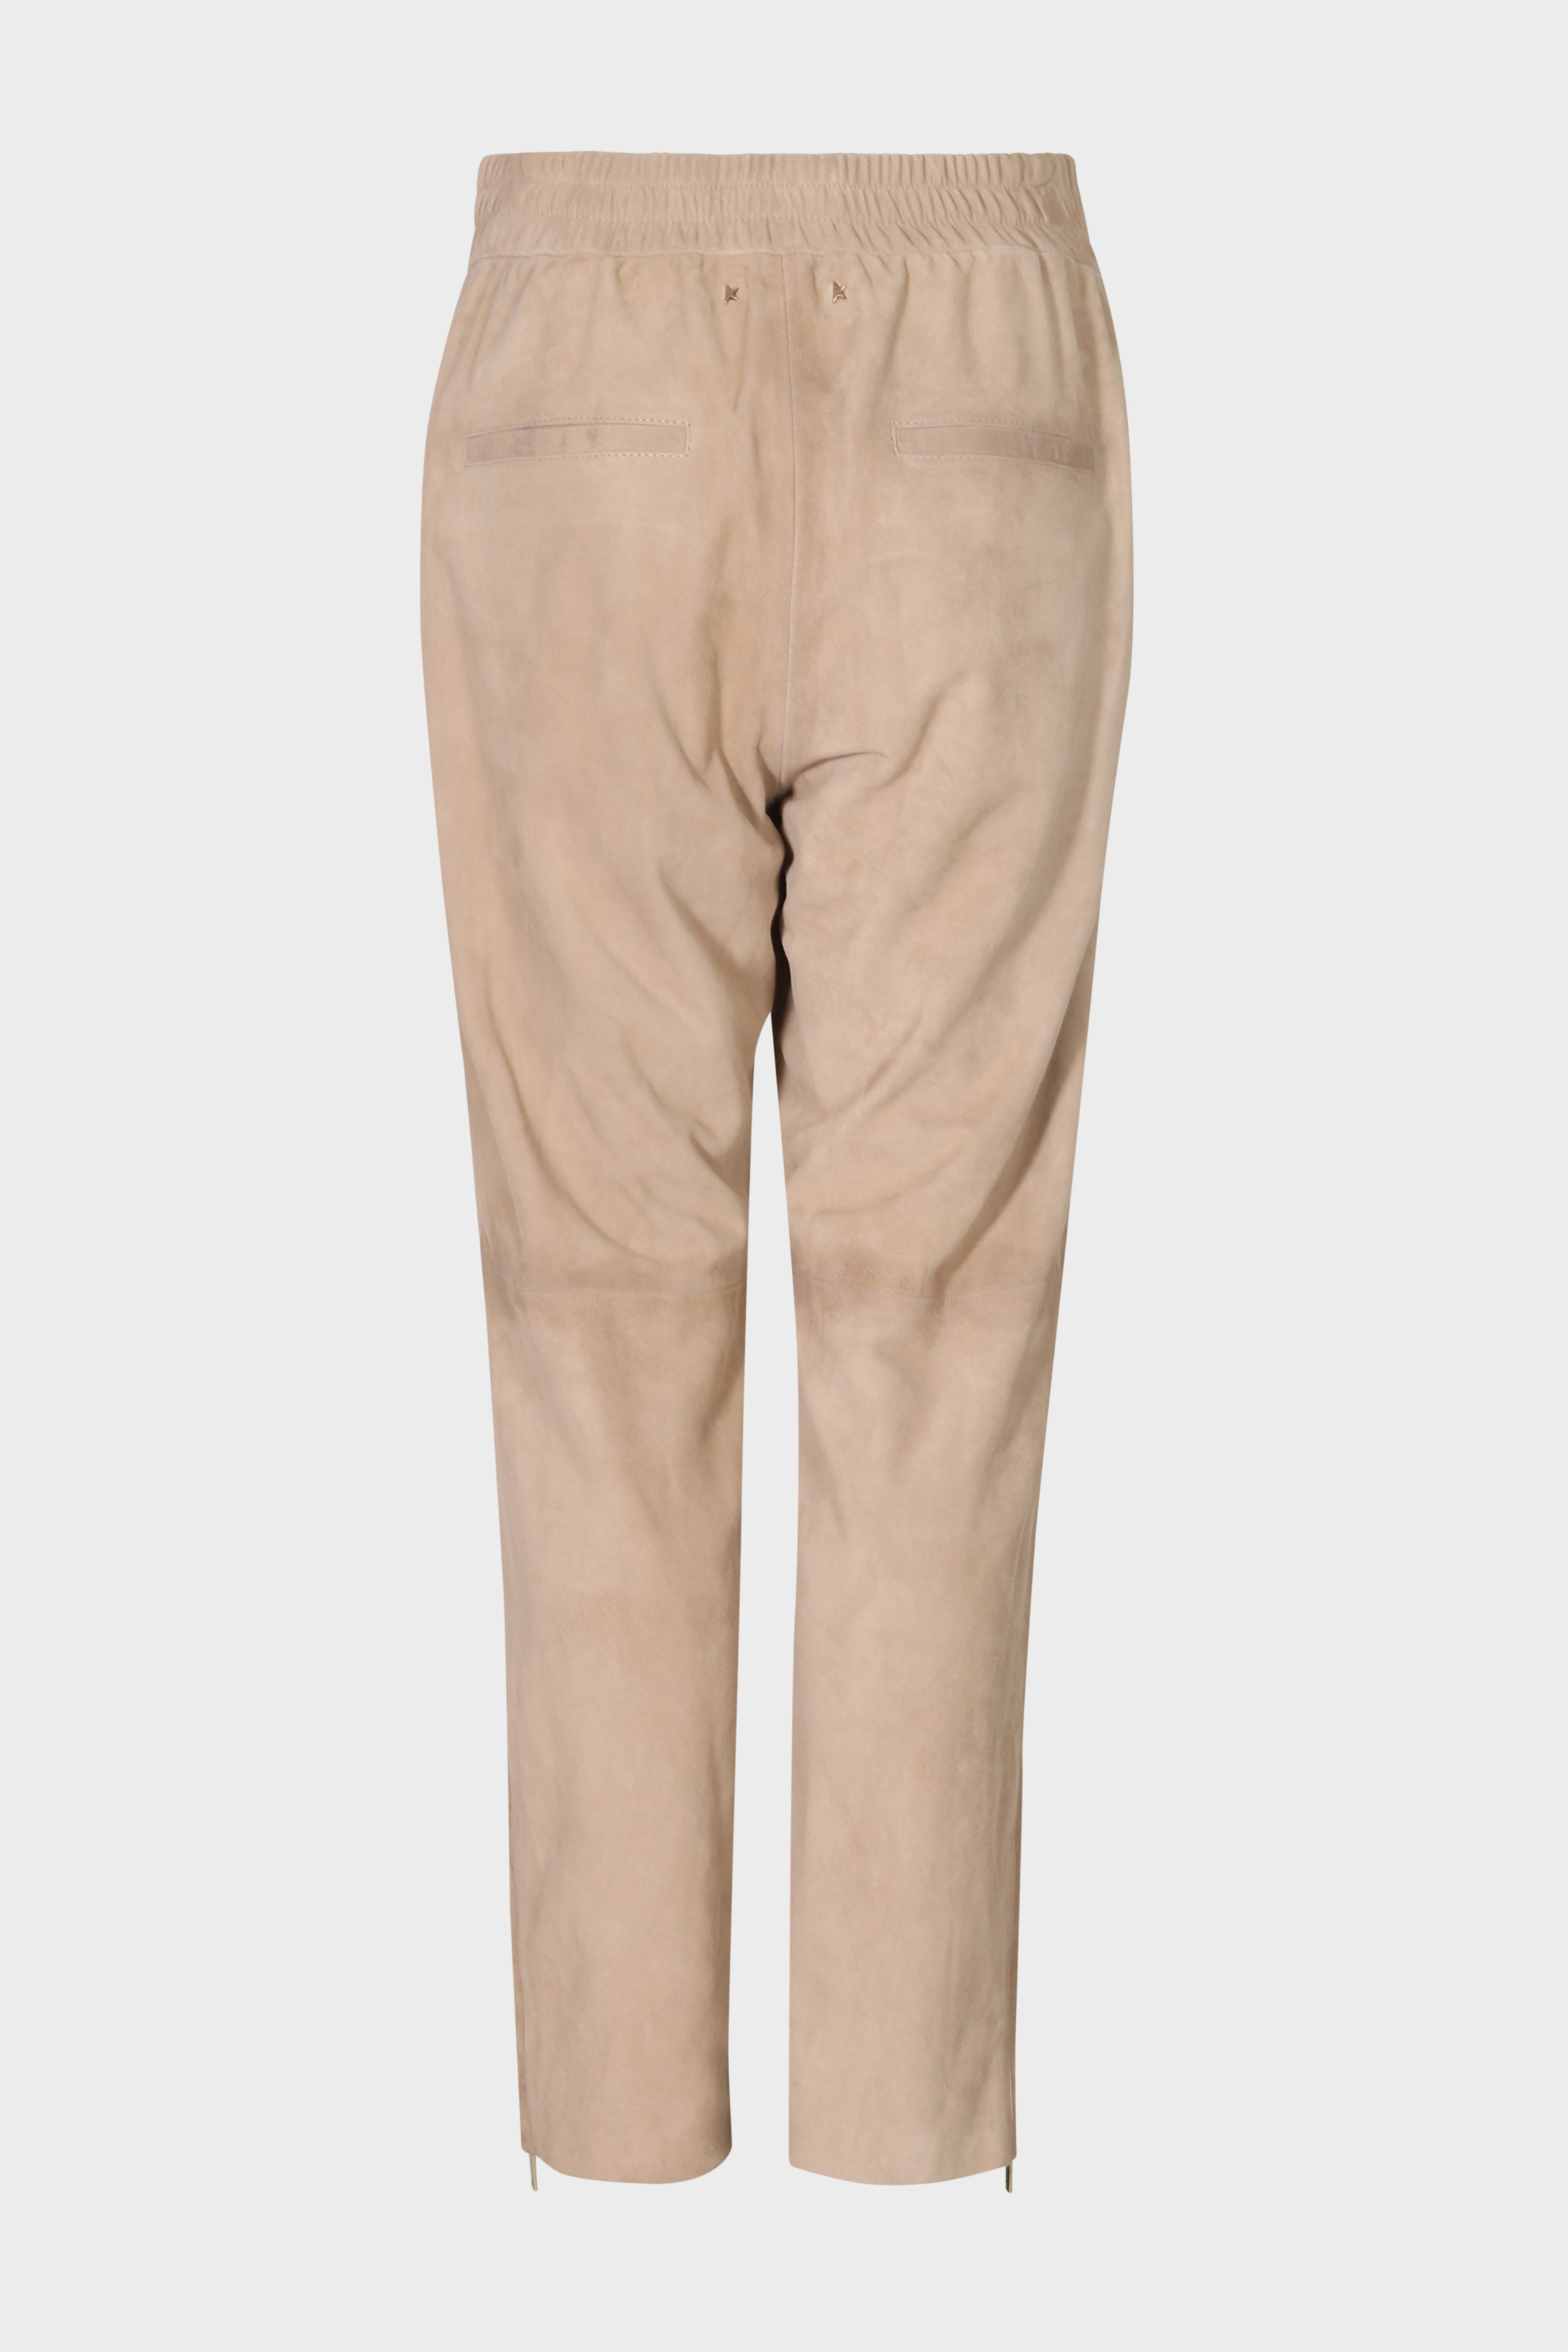 GOLDEN GOOSE Leather Joggpant in Sand IT 40 / EU 34